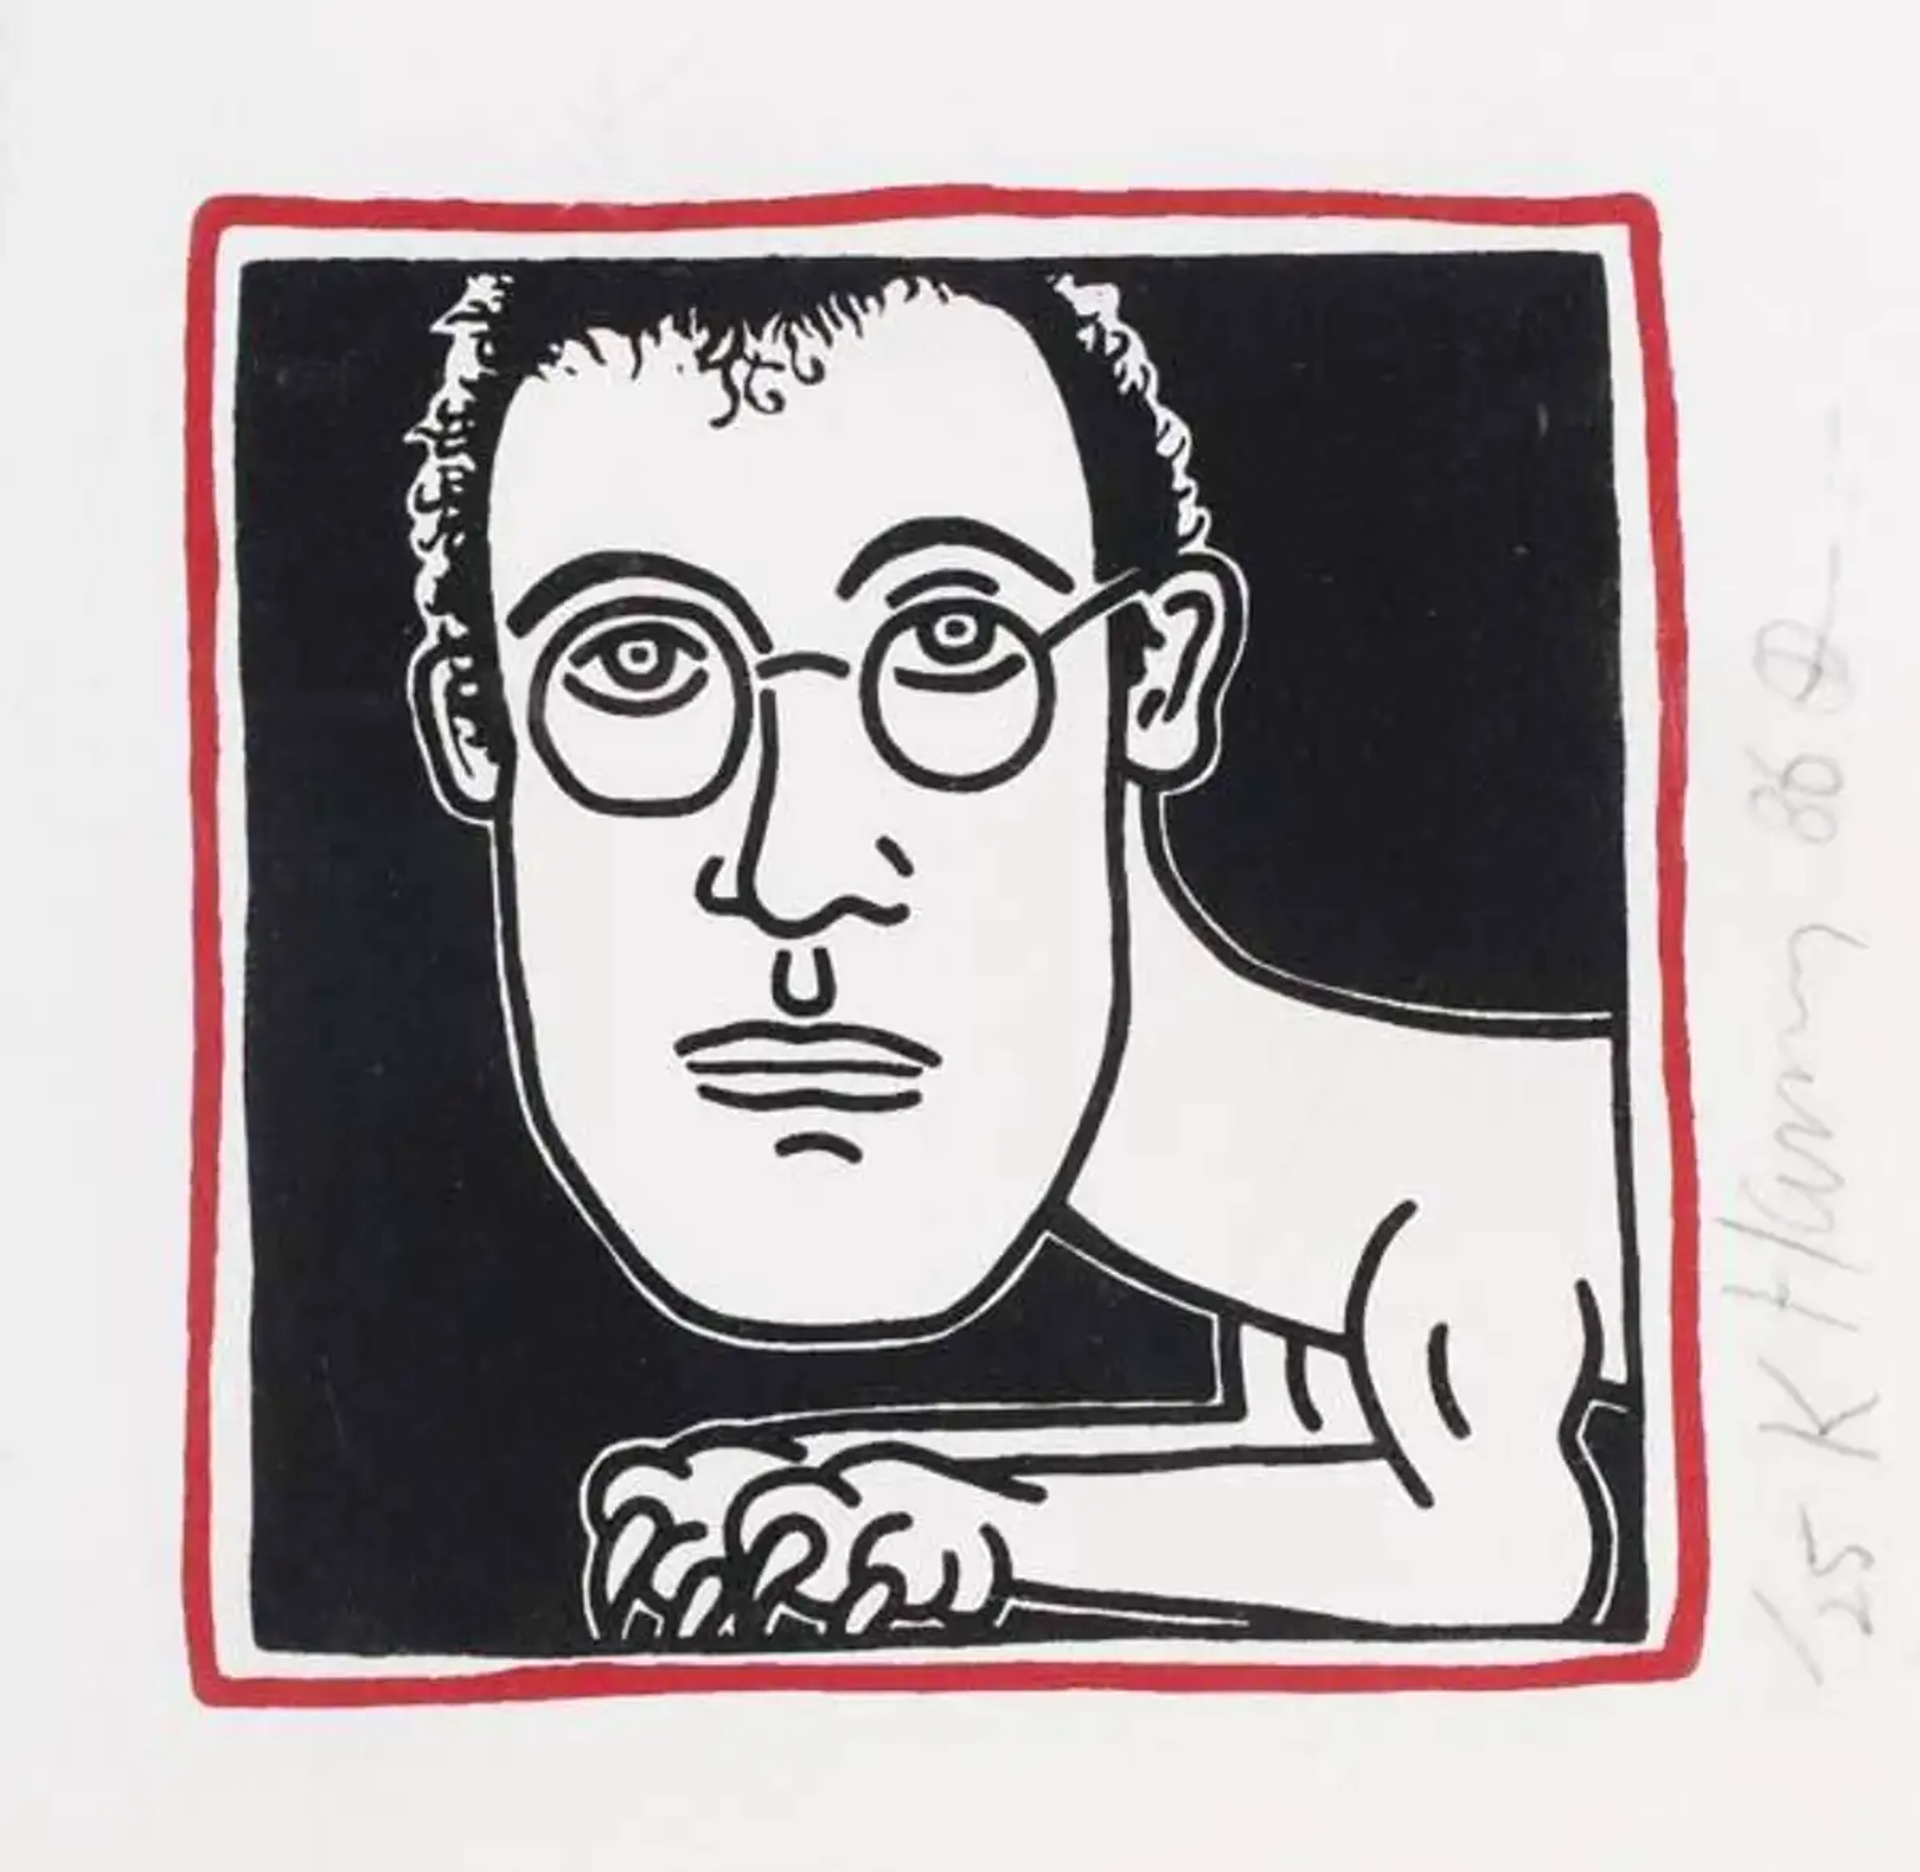 A self-portrait by Haring, whose face forms the central focus of the image, but it is unusual that this portrait shows the artist’s head attached to the body of an animal with sharp claws. This portrait is set against a plain black backdrop, framed with a bright red, crayon-like line as the only use of colour in the image.